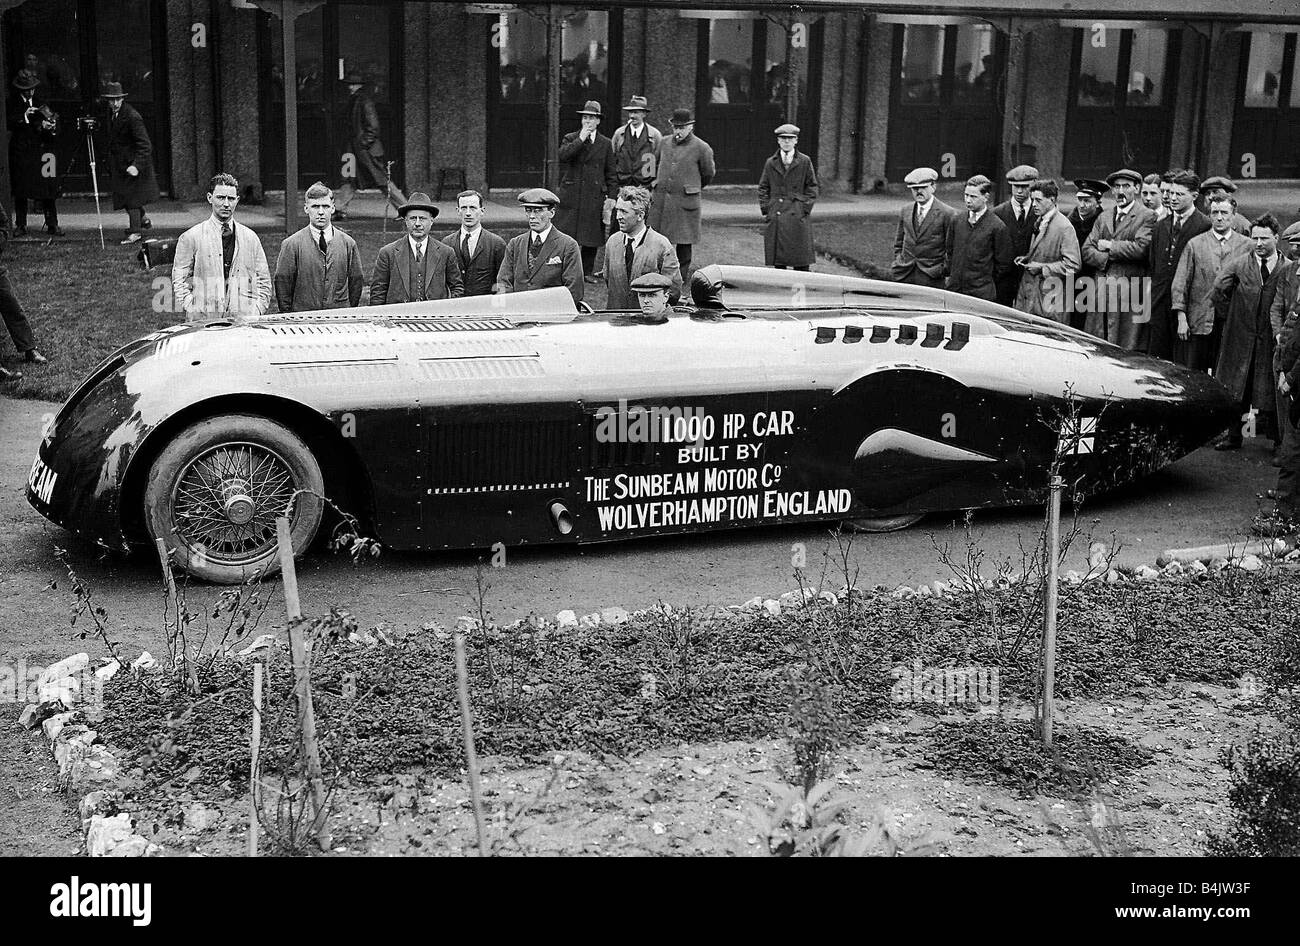 The 1000hp Sunbeam car in which major H O D Segrave attempted to break the worlds land speed record Transport Car TransportX Stock Photo